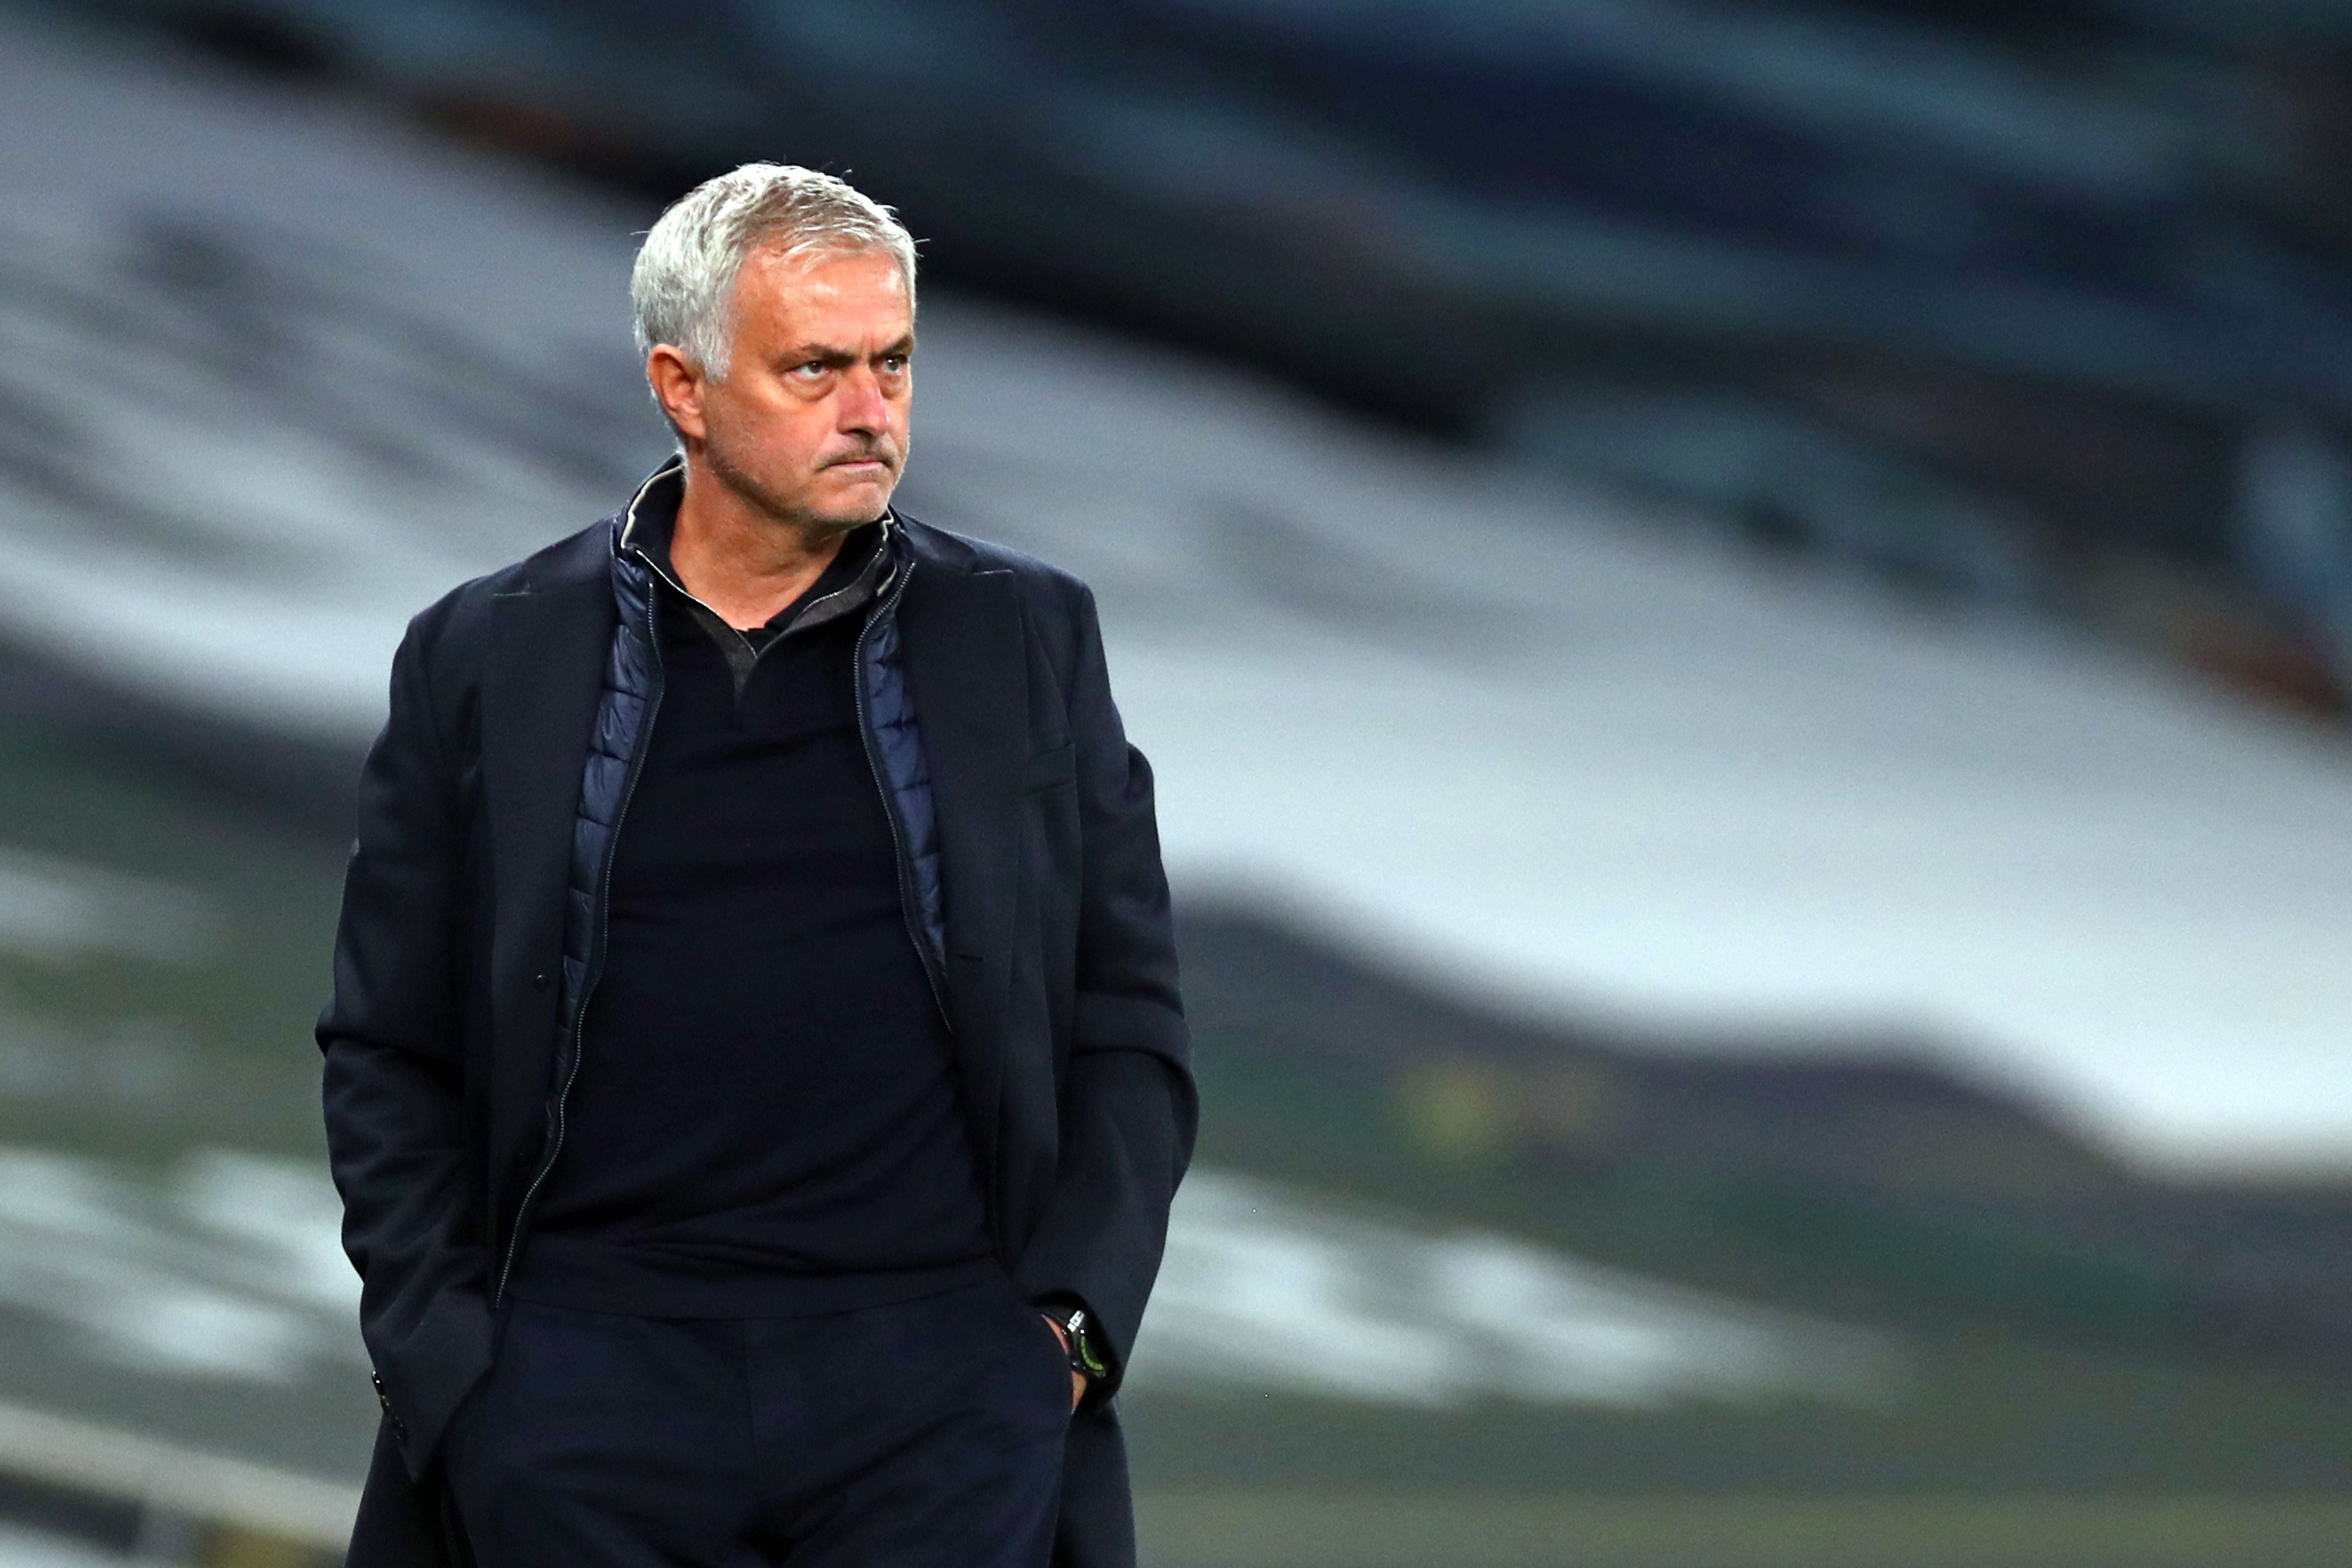 Jose Mourinho believes Manchester United fans know he achieved everything he could while manager